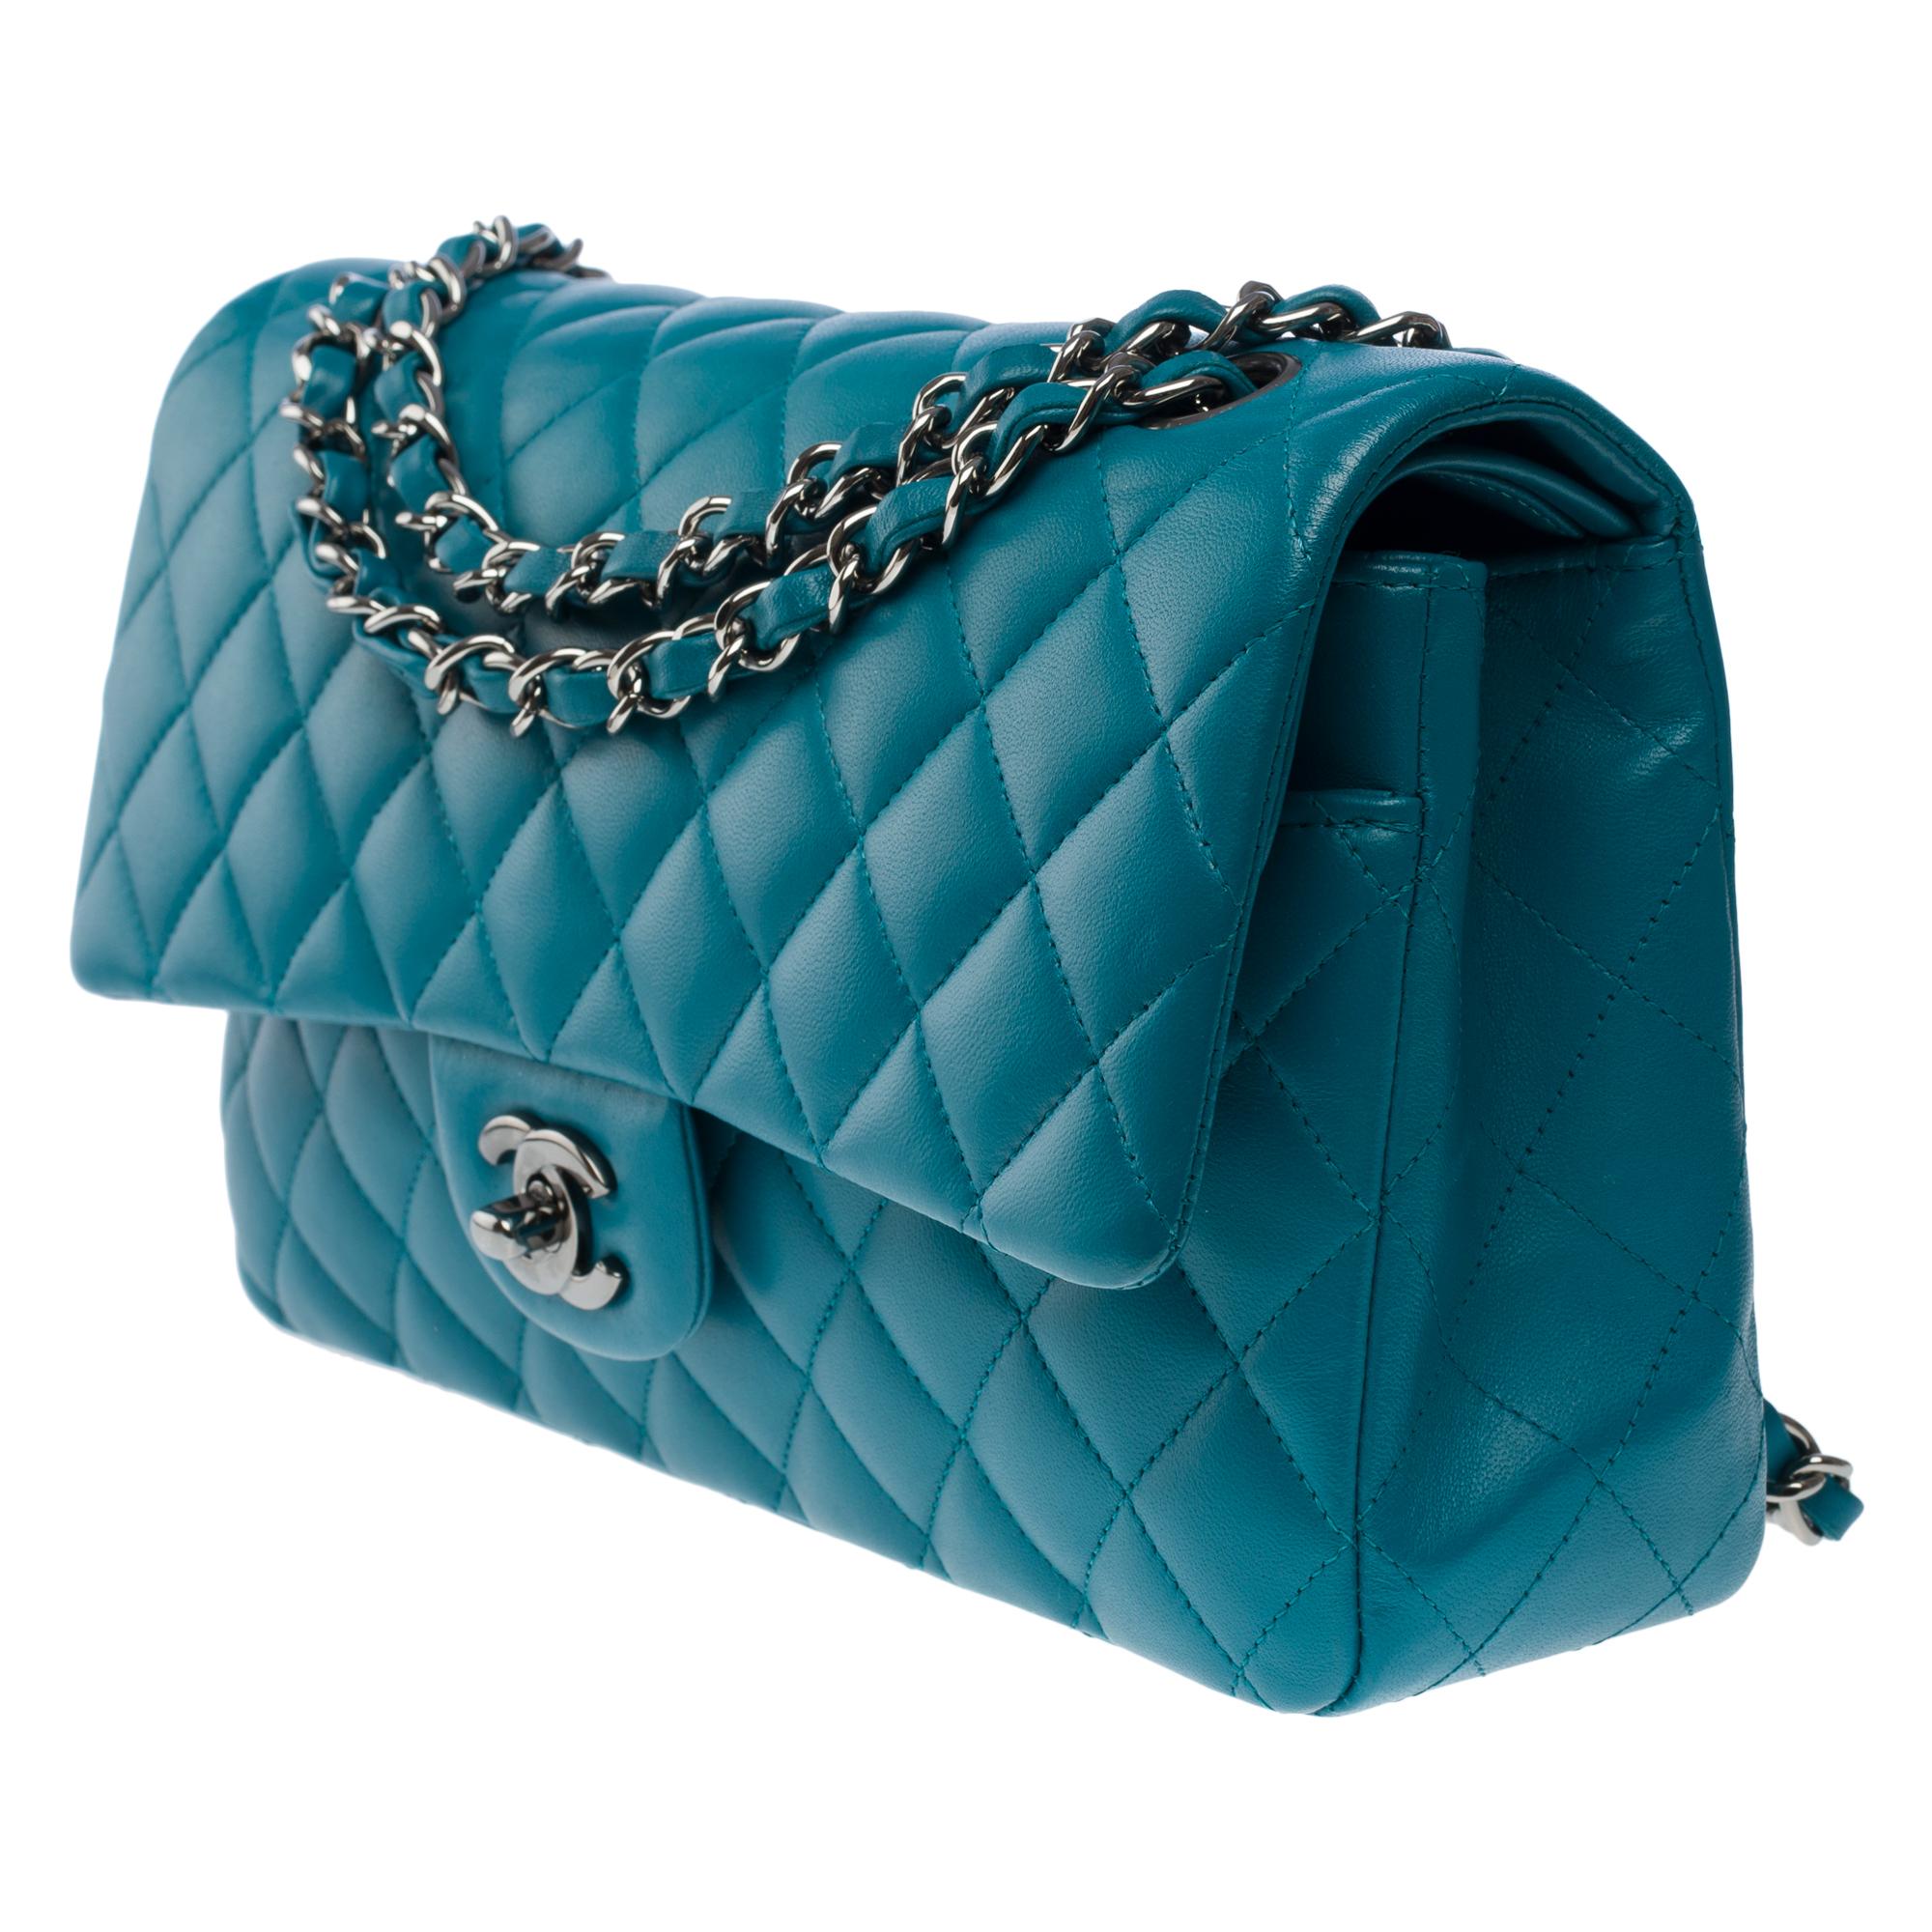 Chanel Timeless double flap shoulder bag in Turquoise quilted lamb leather, BSHW For Sale 1